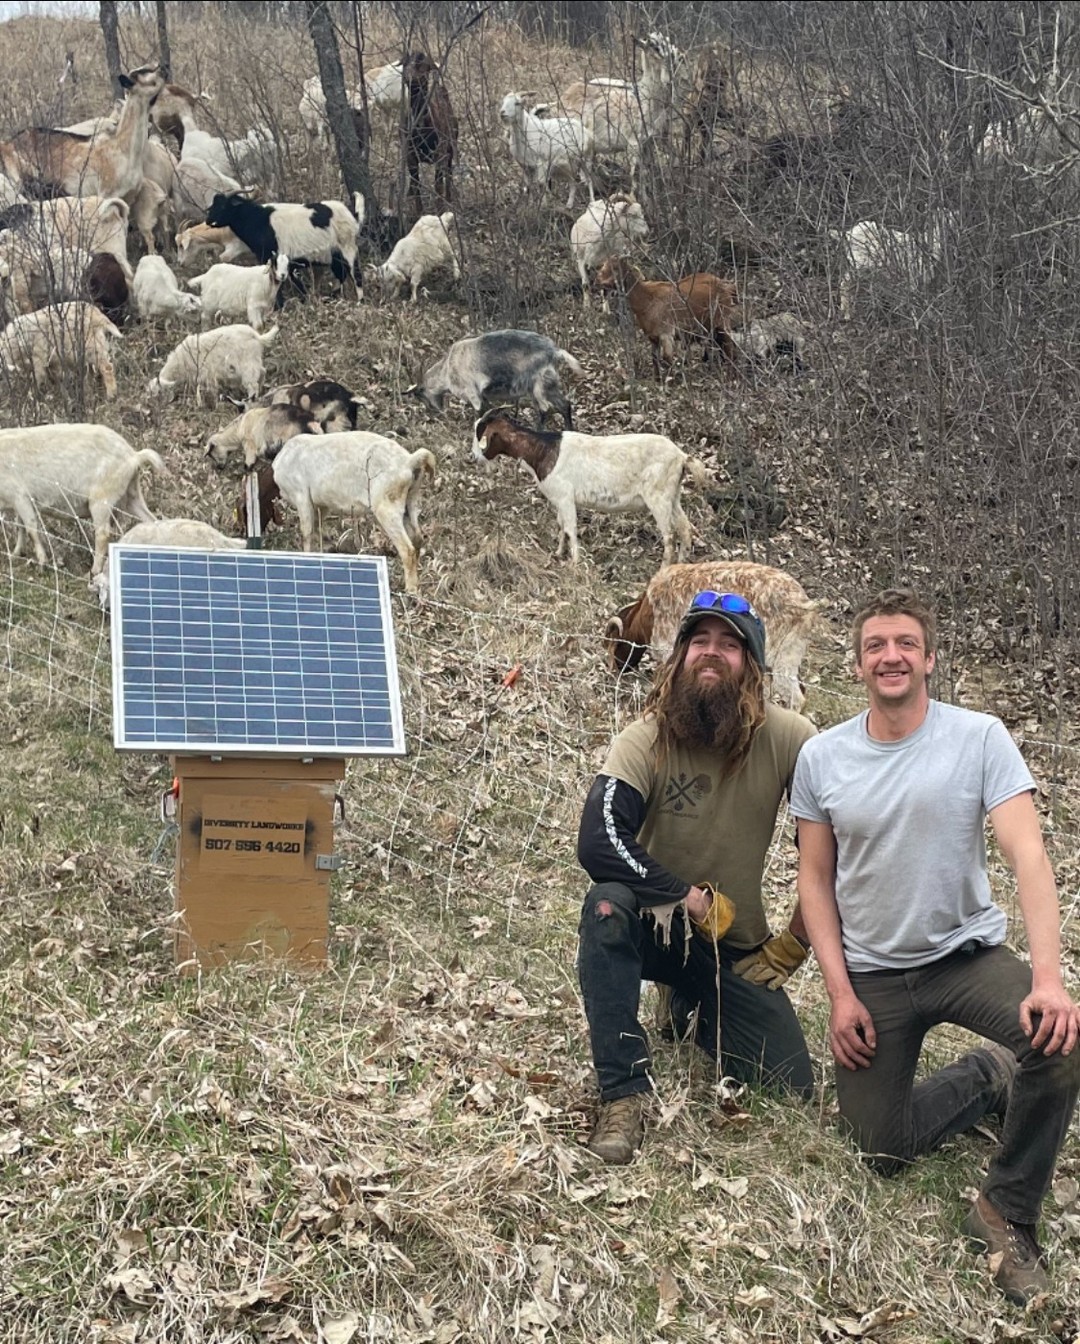 Meet Upstream Partner:  Diversity Landworks (@diversitylandworks)Since its inception in 2014, Diversity Landworks has worked throughout Minnesota to preserve the land with a unique solution: goats. They use goats, in addition to other restoration tactics like controlled burning, to manage populations of invasive species throughout the state in an effort to care for Minnesota’s natural places.https://www.diversitylandworks.com/ — from Instagram